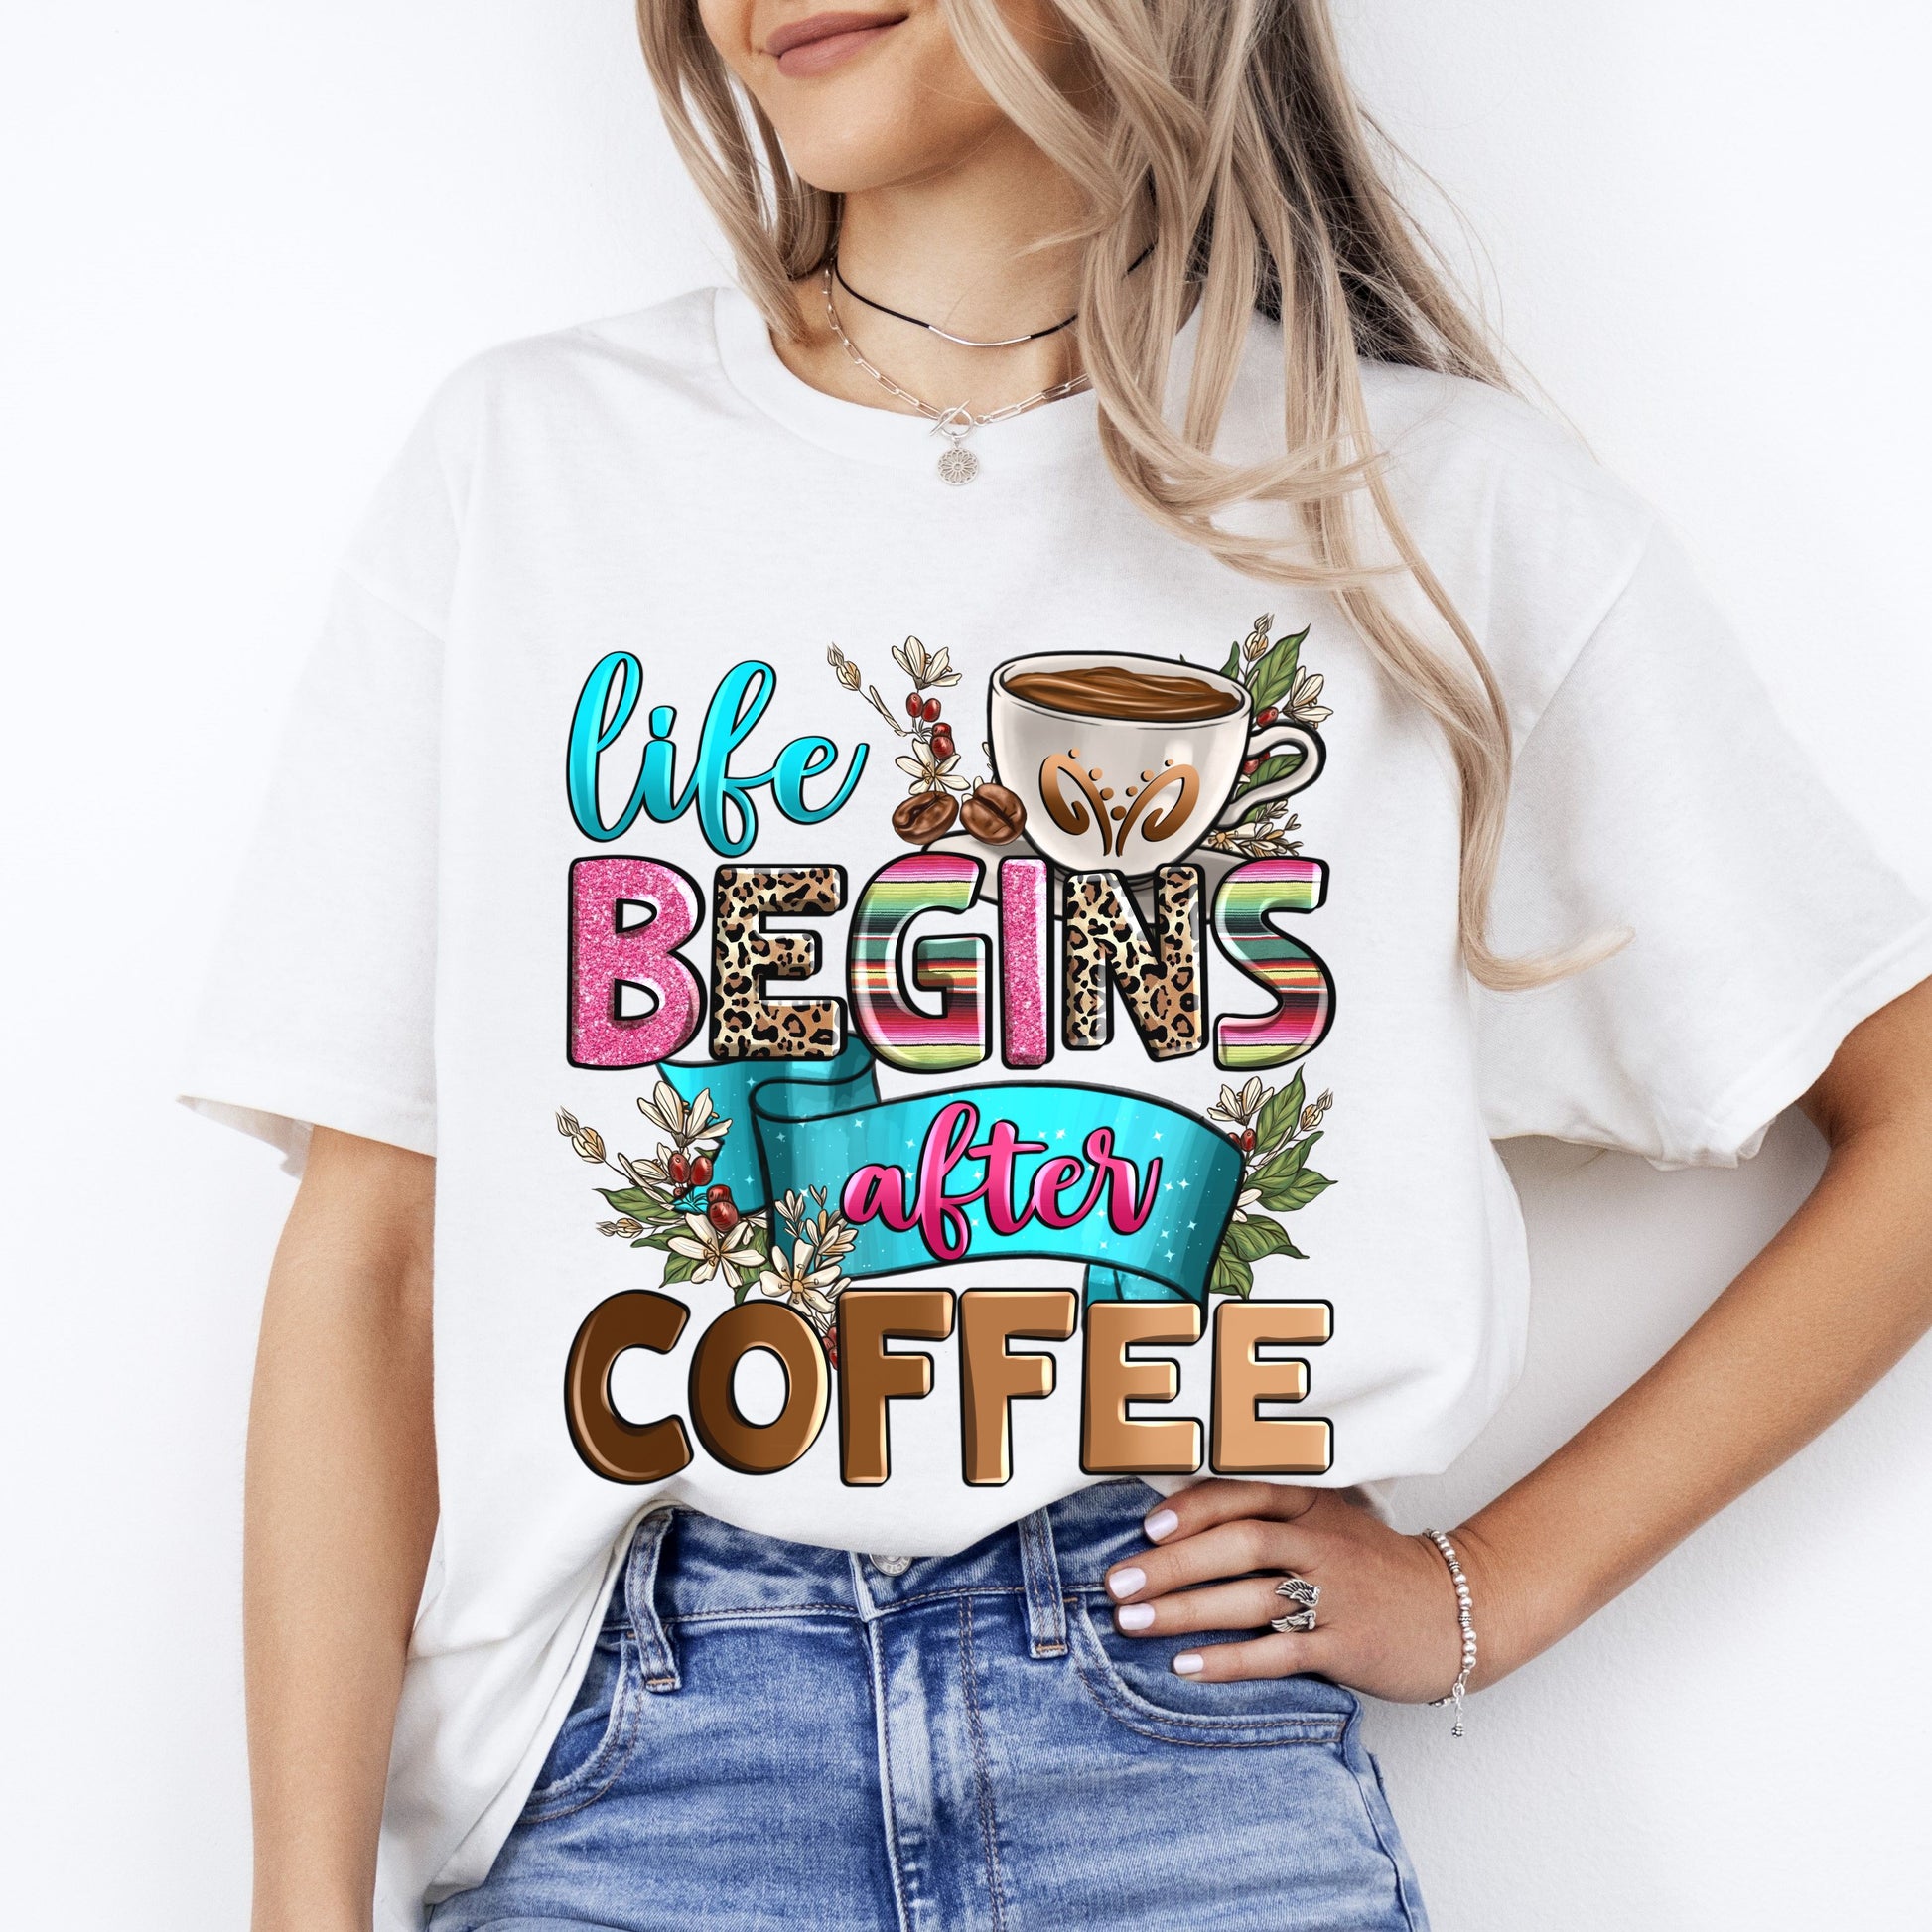 Life begins after coffee T-Shirt gift Morning Coffee lover Unisex Tee Sand White Sport Grey-White-Family-Gift-Planet